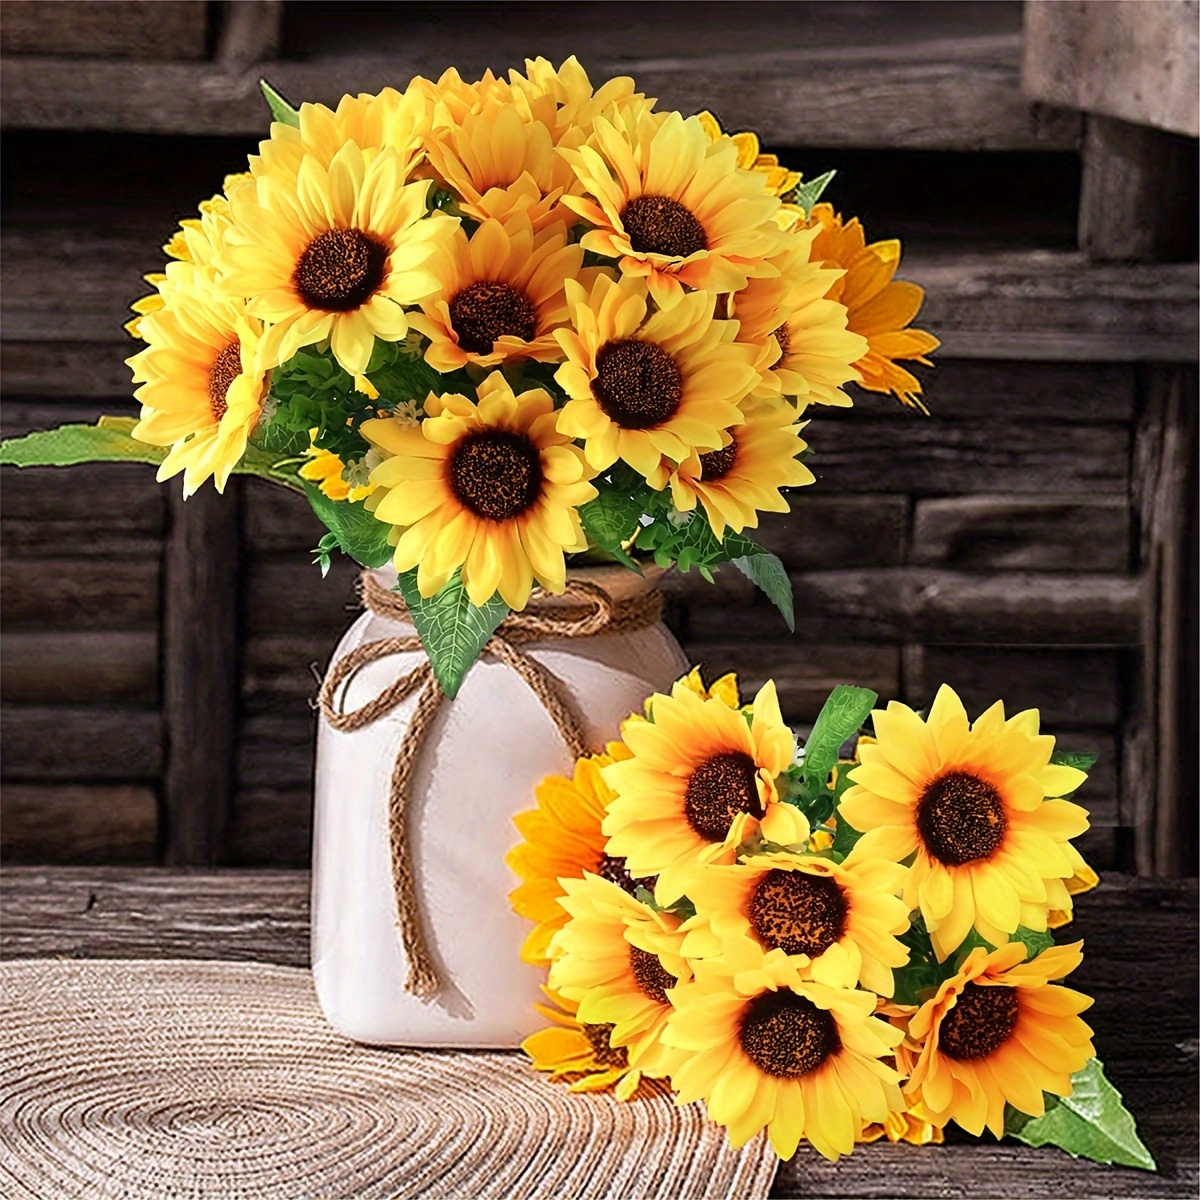 

Artificial Sunflower Bouquet With 13 Silk Flower Heads - Realistic Plastic Sunflowers For Home Decor, Housewarming, And Photography Props